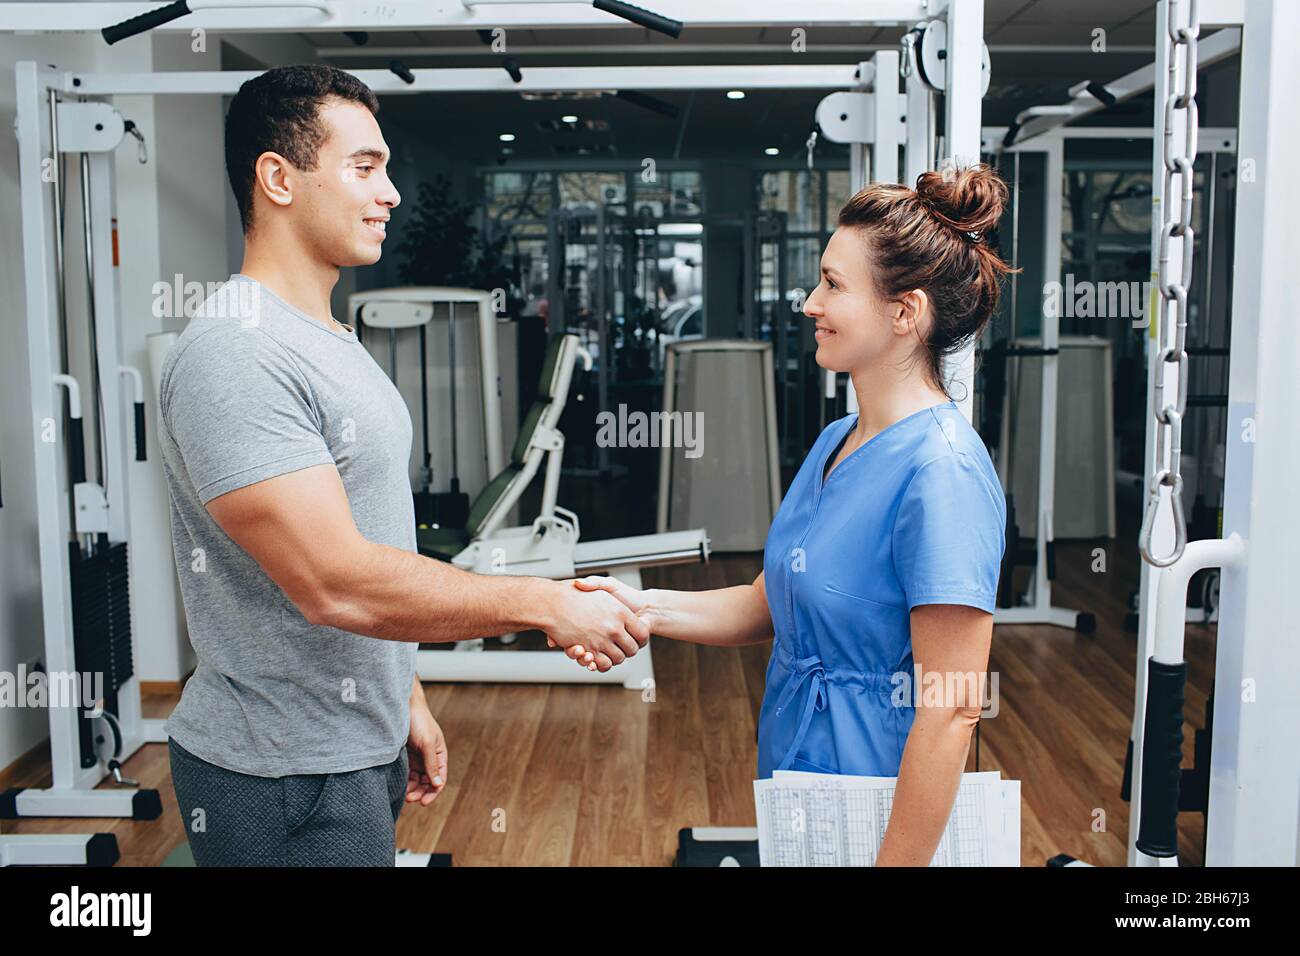 Healthy athlete says thanks to the physiotherapist for the treatment. Rehabilitation center helps athletes recover from injuries Stock Photo